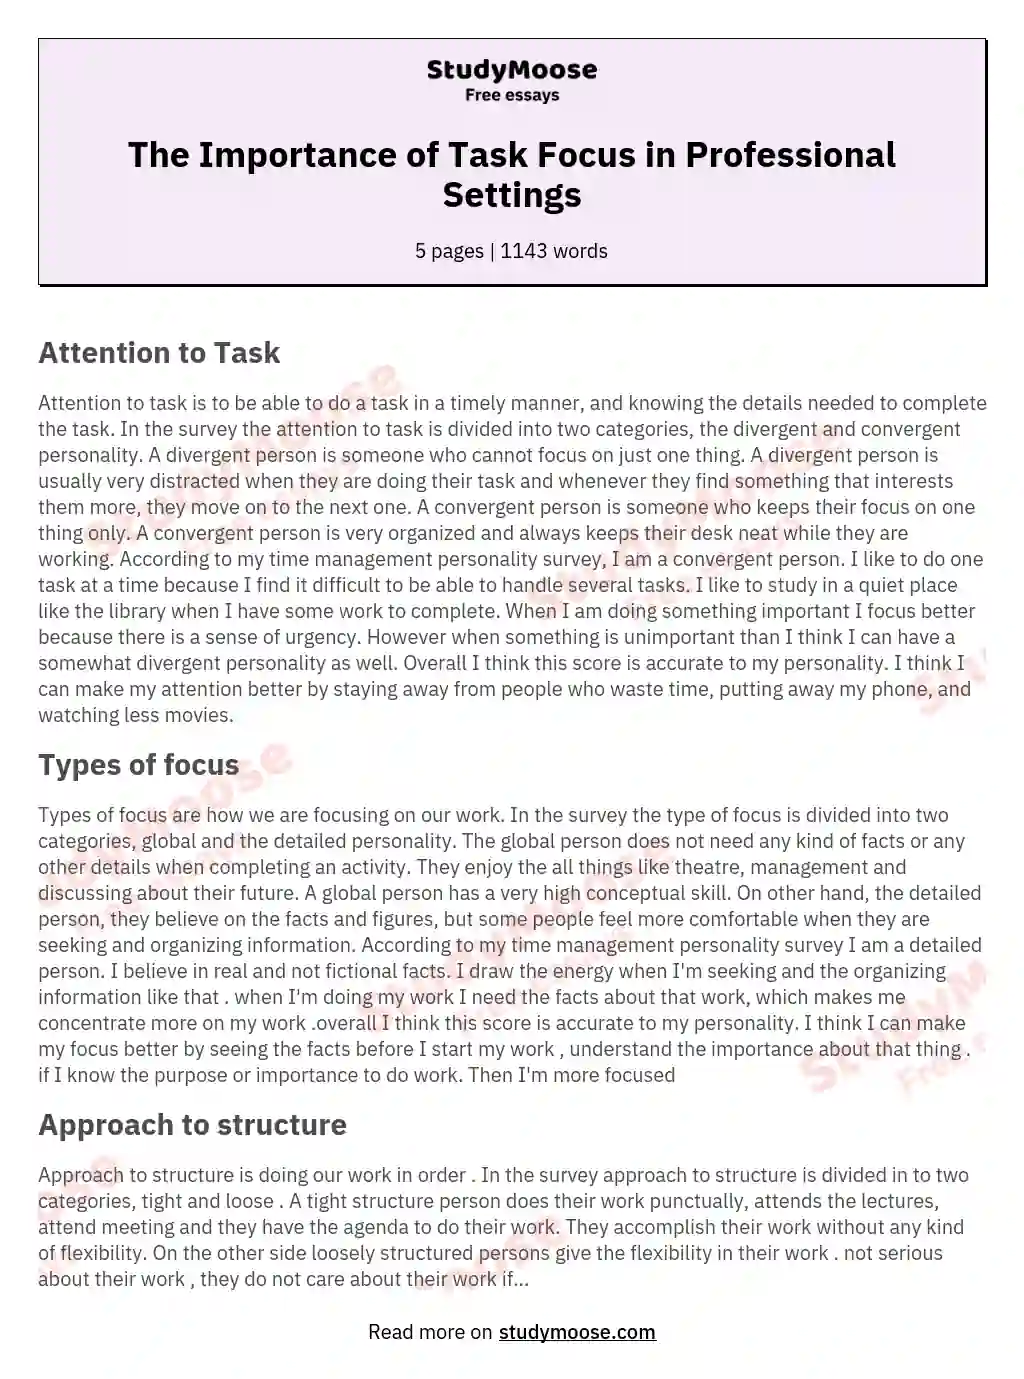 The Importance of Task Focus in Professional Settings essay